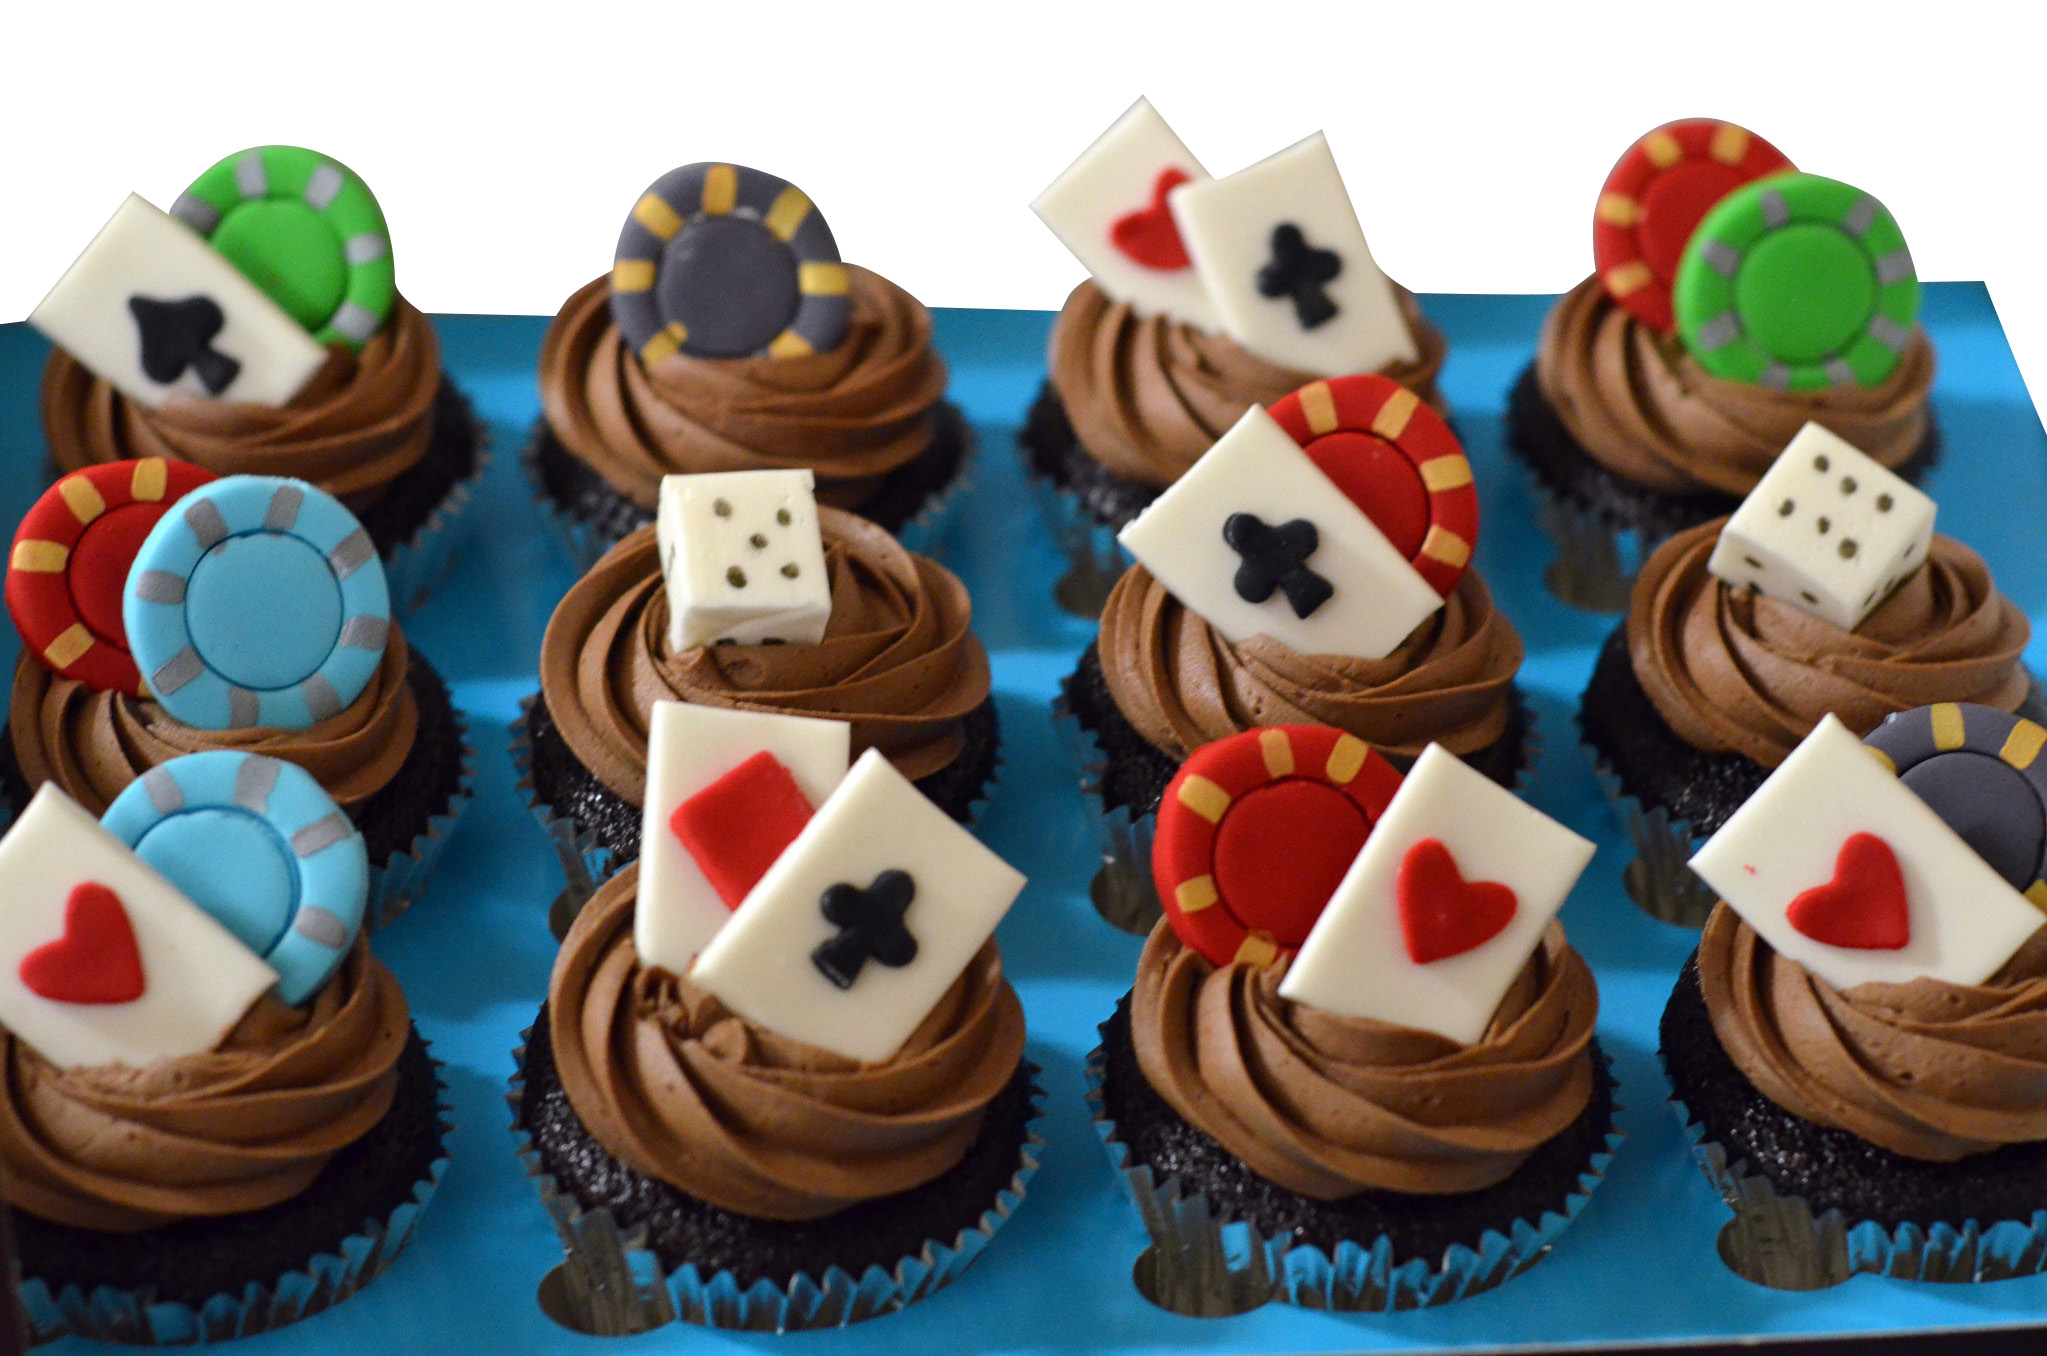 Chocolate Frosting Poker Theme Cupcakes -  Pack of 6